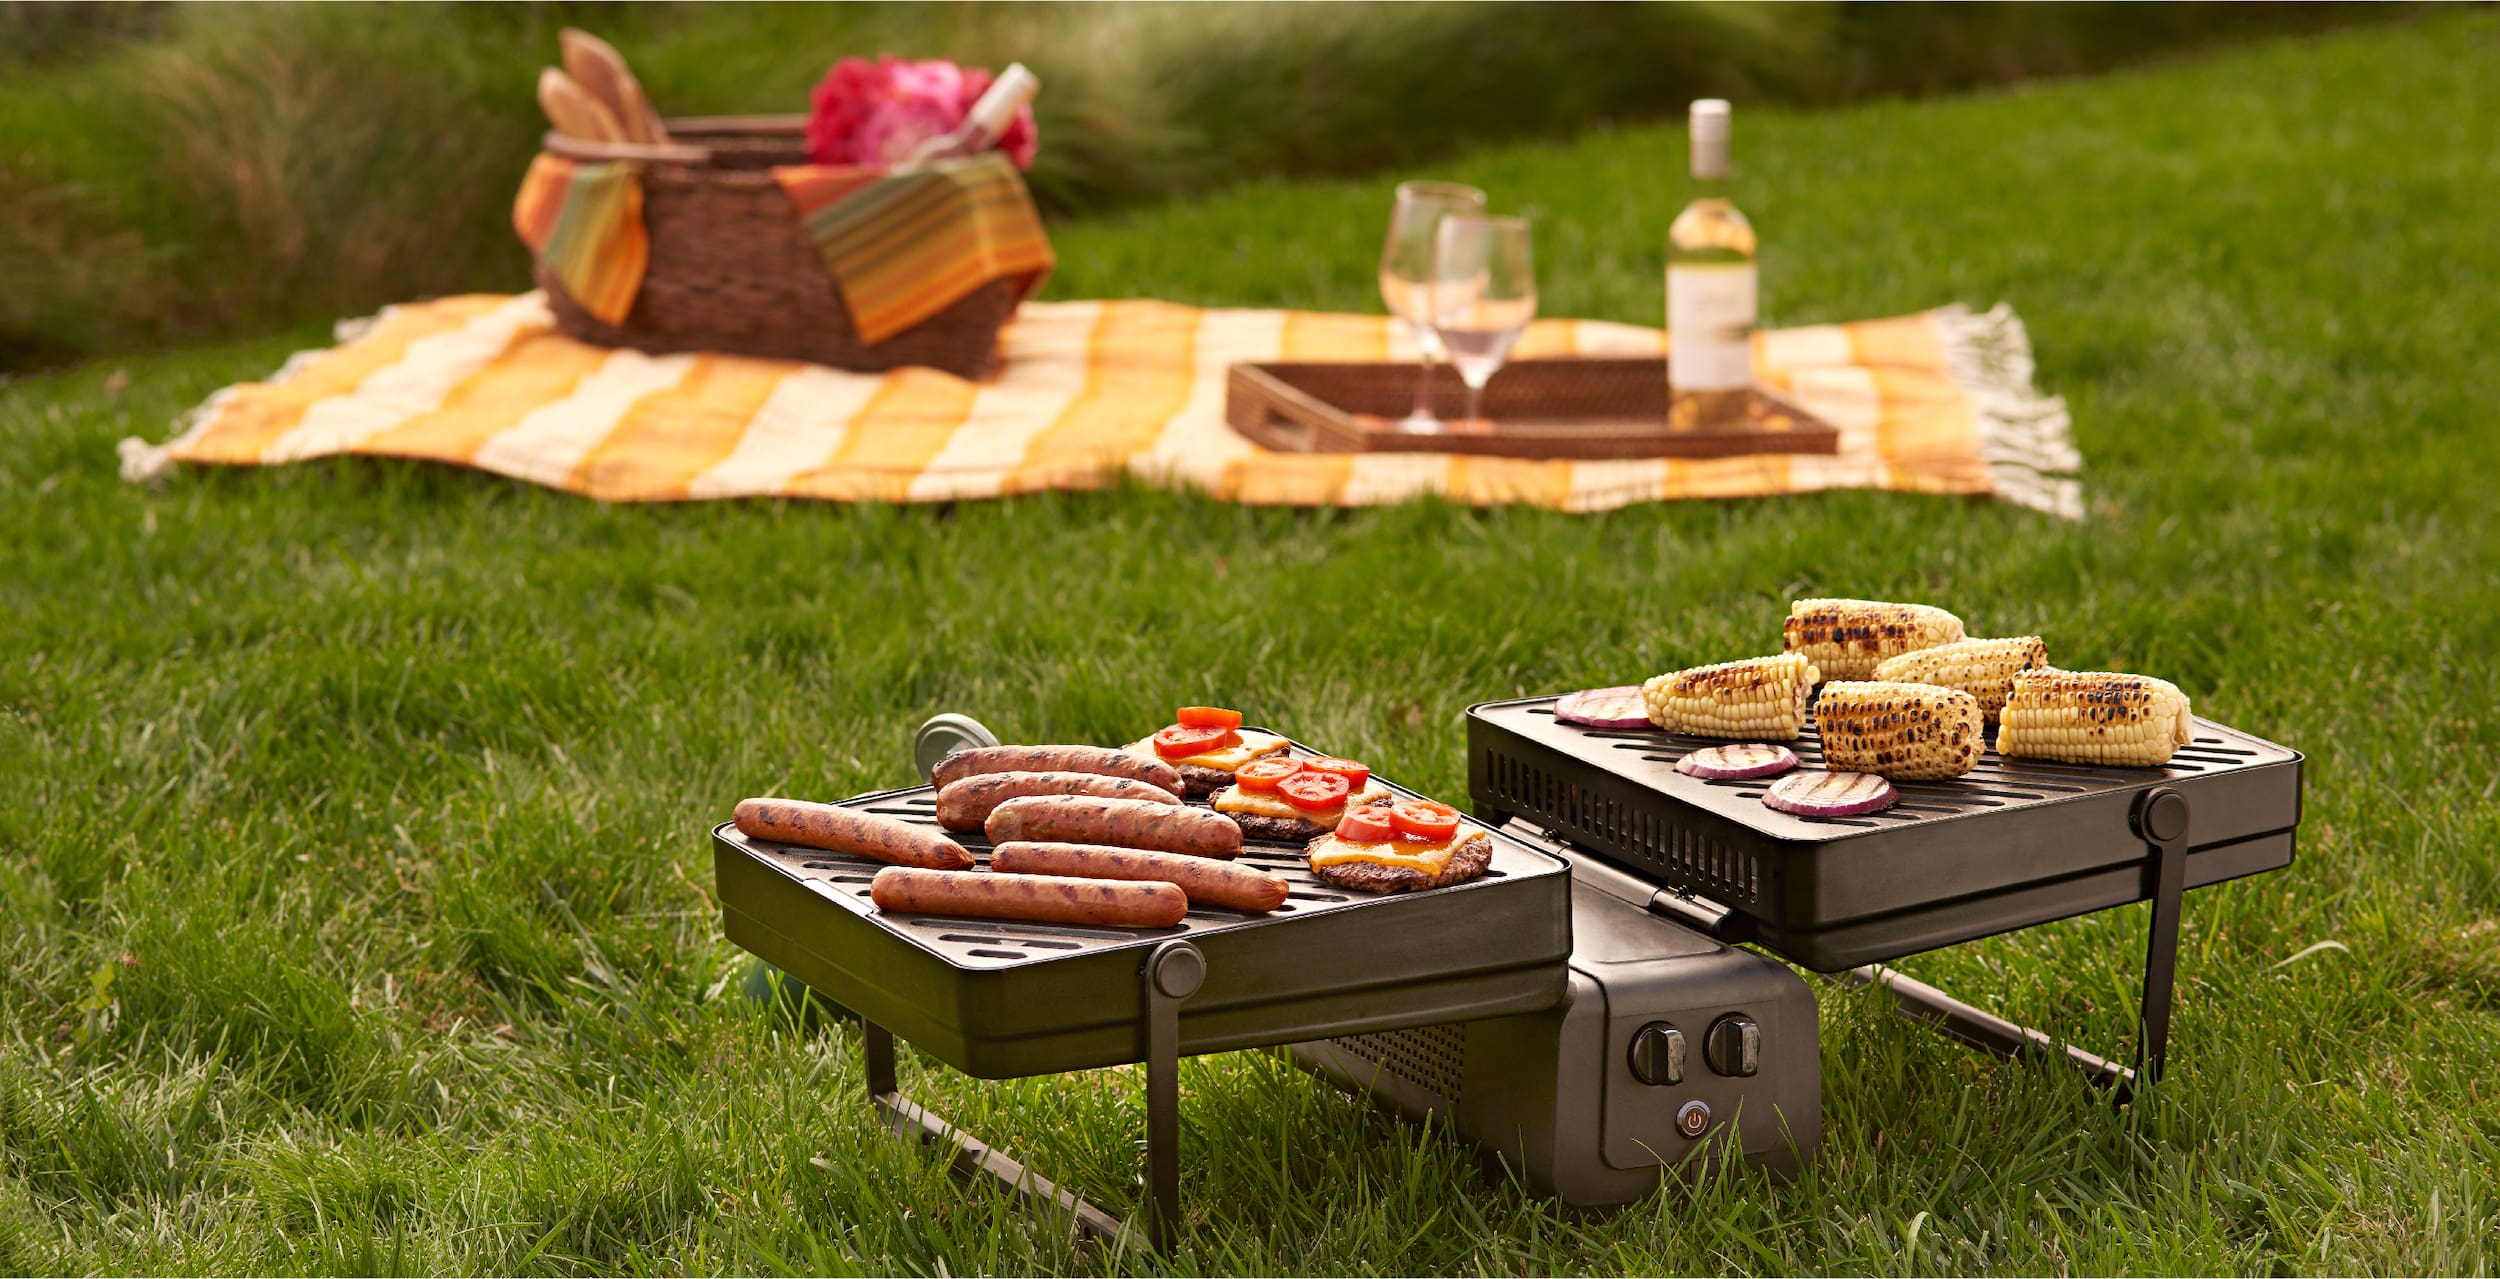 Elevate Grill bring used as part of a picnic